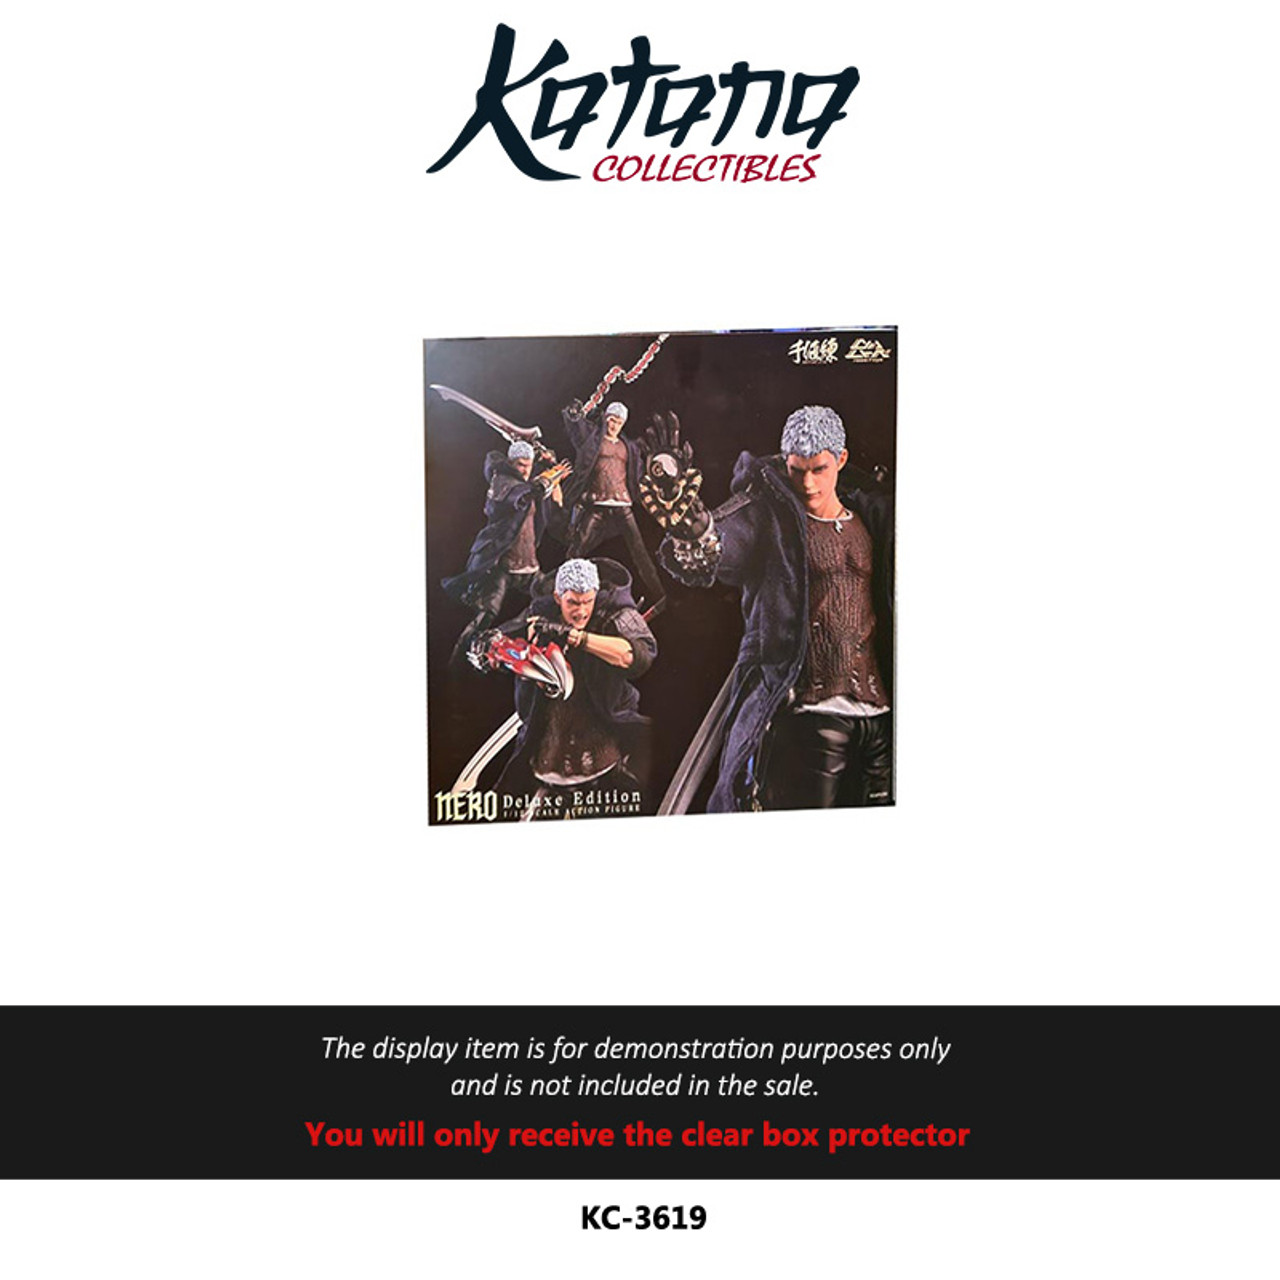 Katana Collectibles Protector For Nero Delux Edition